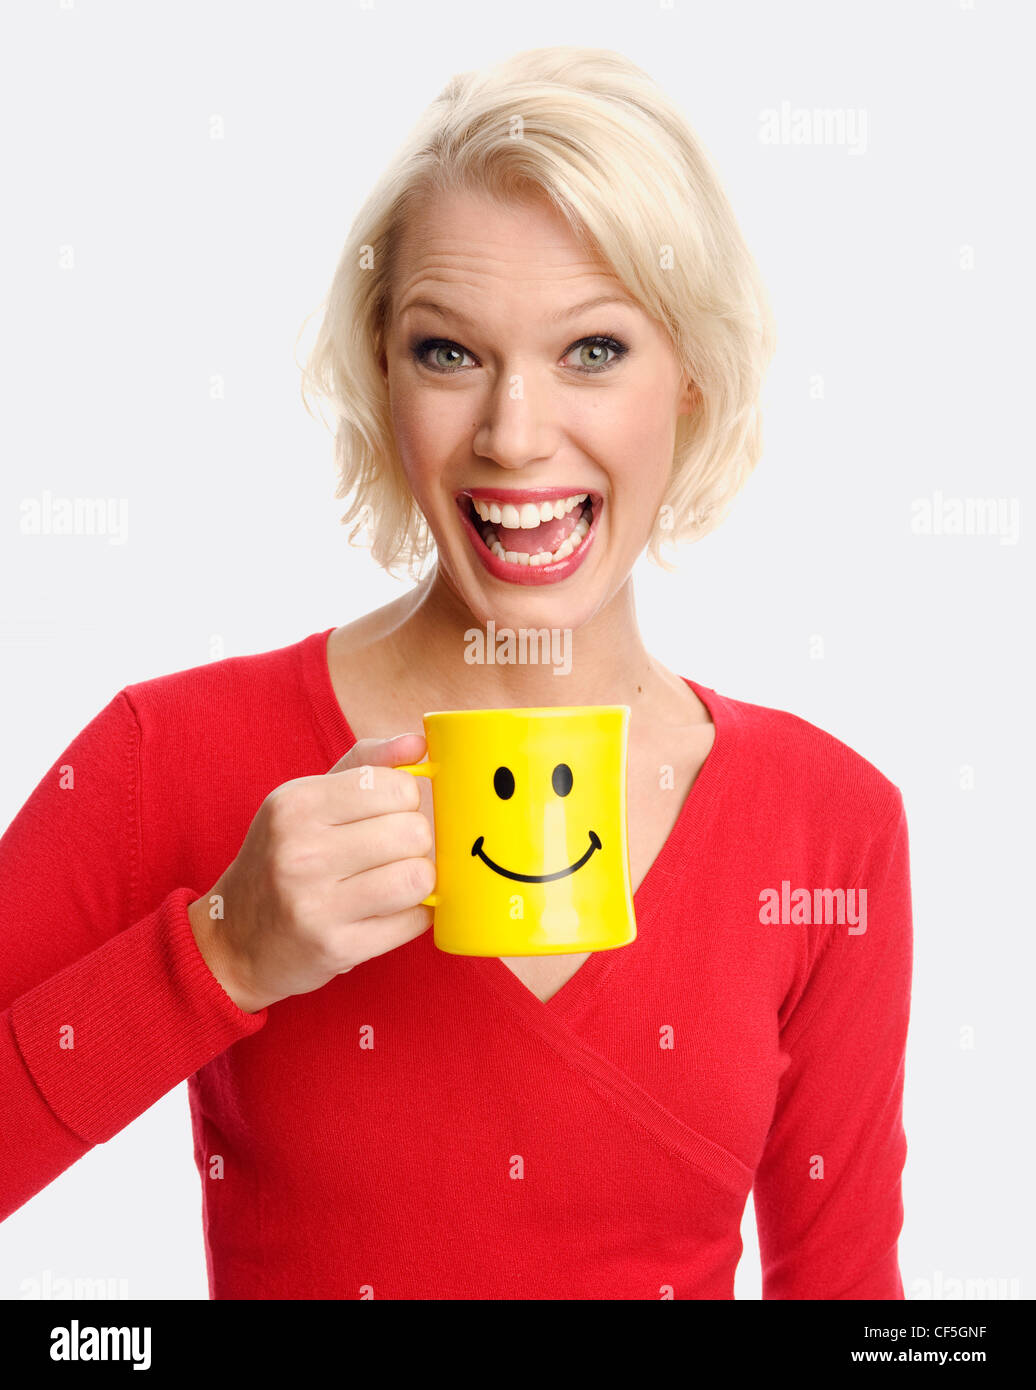 Female holding a yellow mug with a smiley face Stock Photo